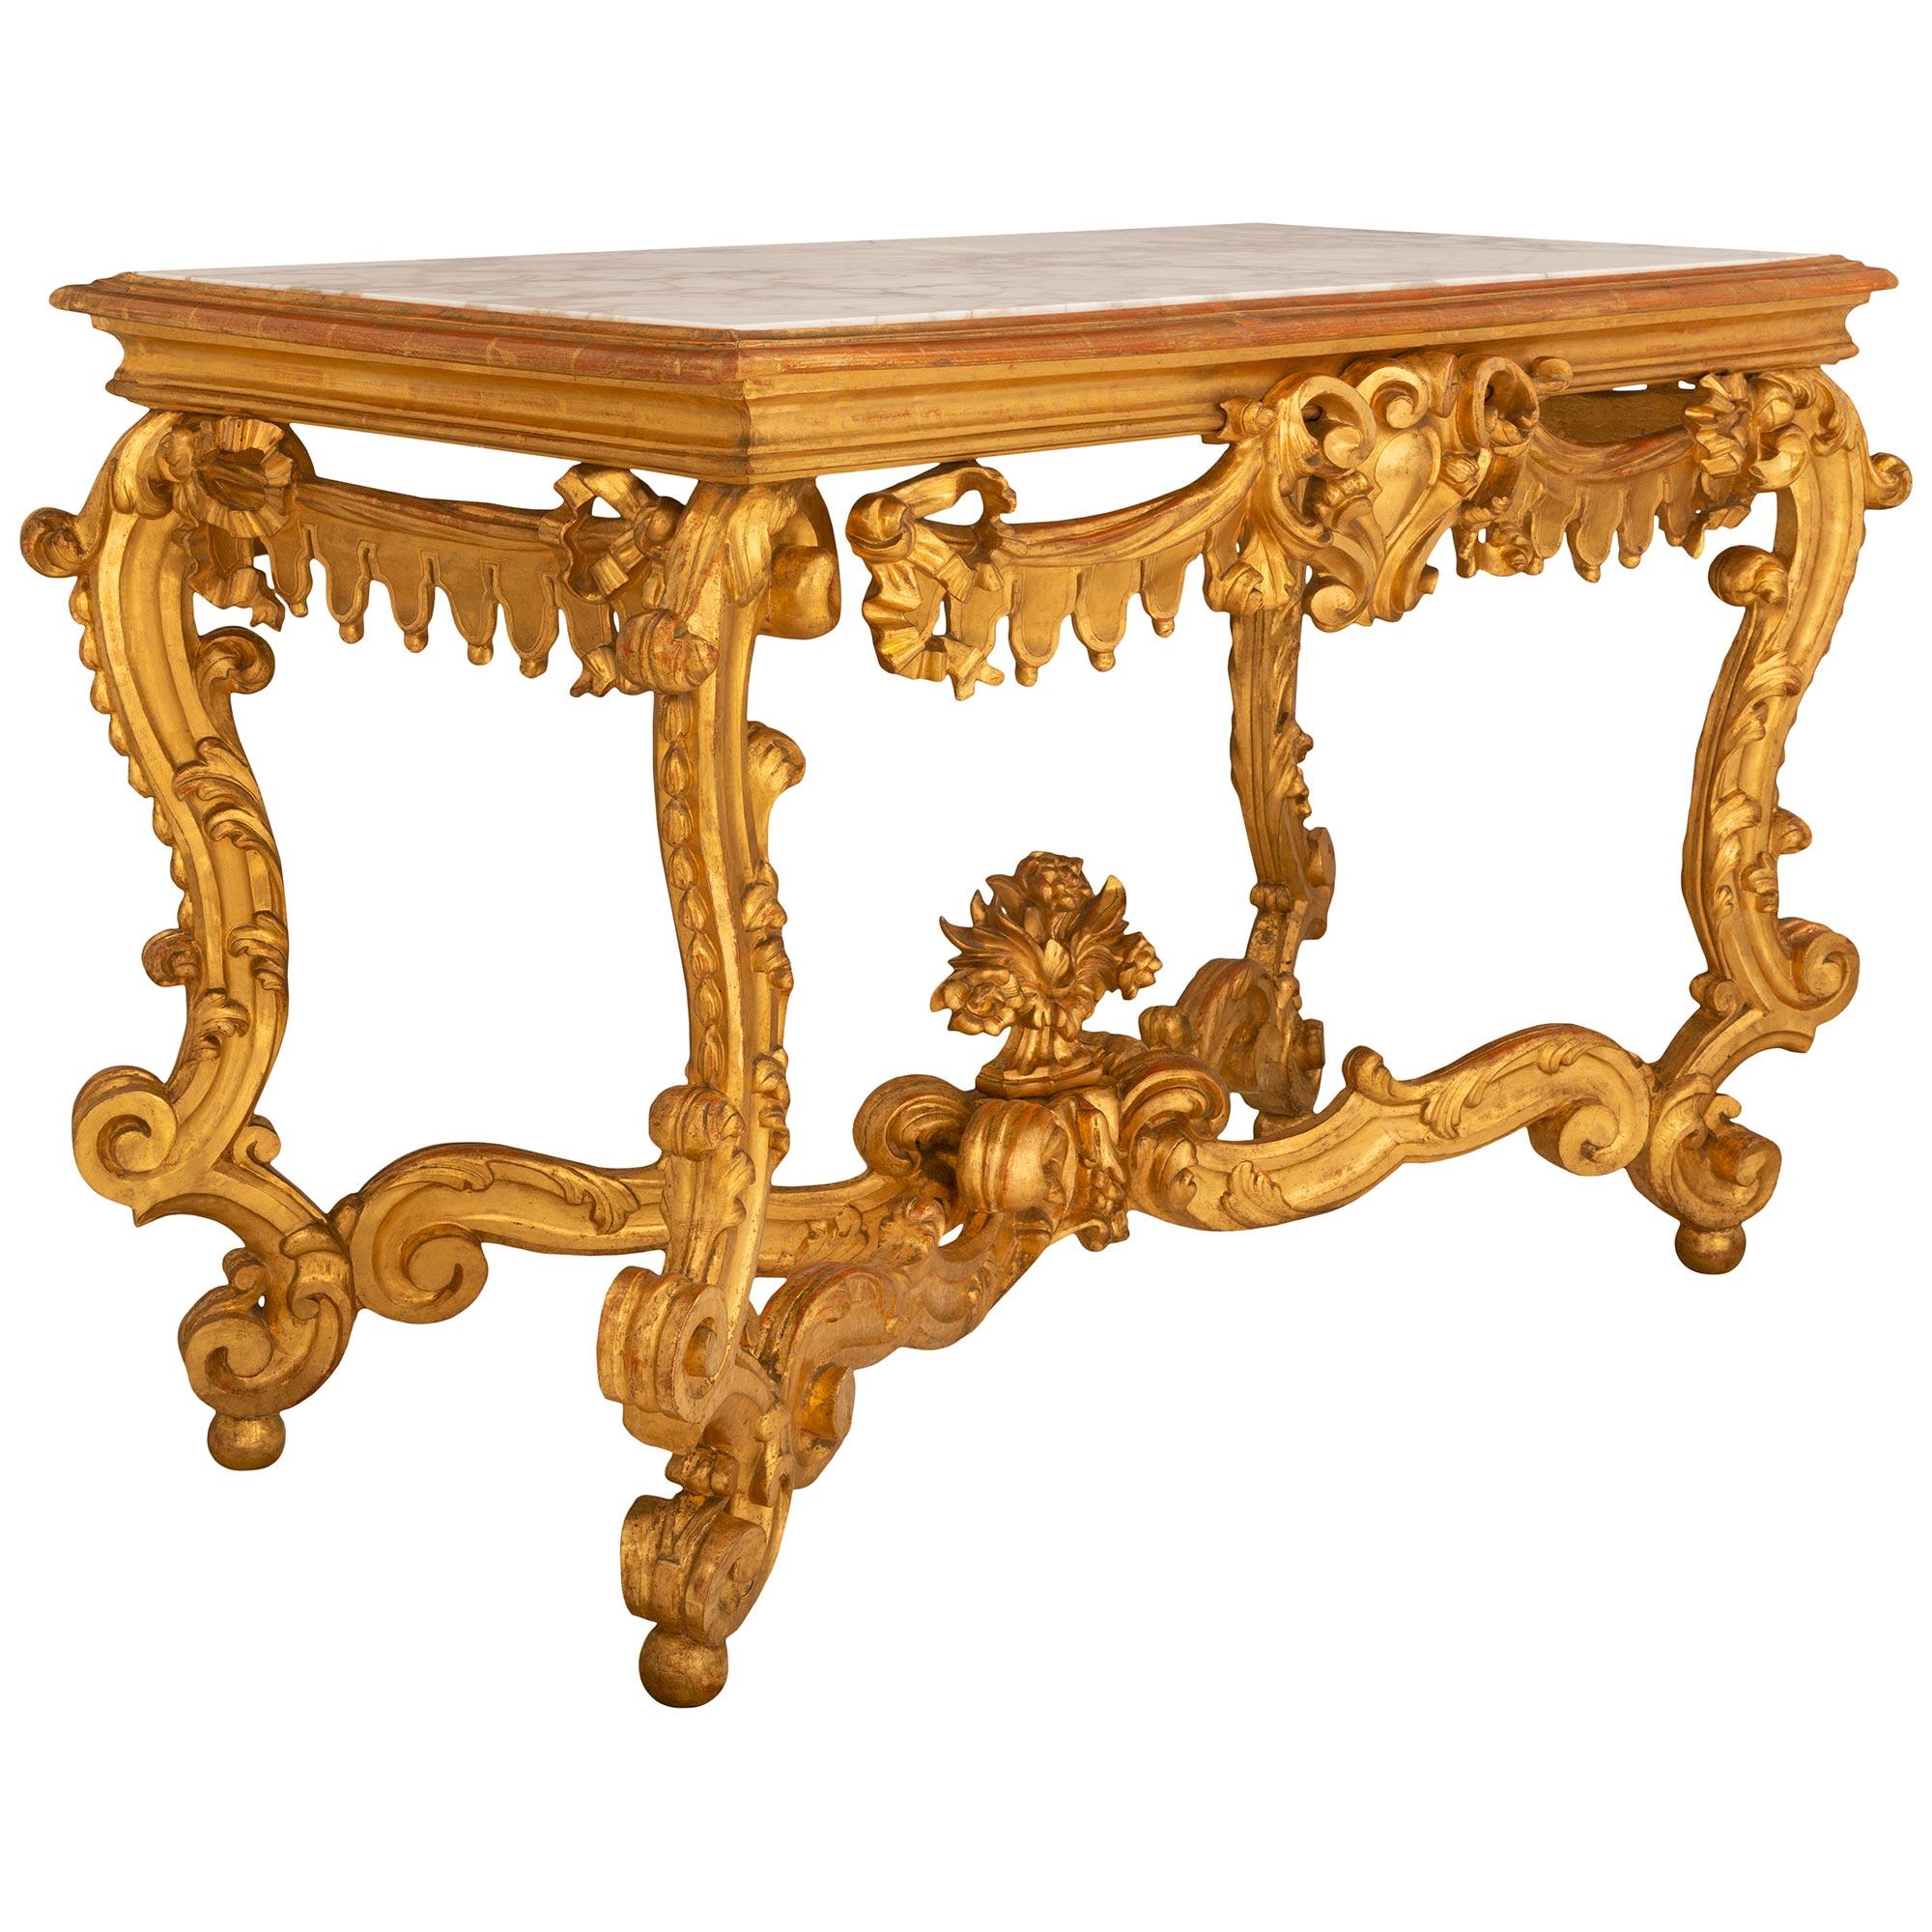 Italian Mid-19th Century Venetian Giltwood and Marble Freestanding Console In Good Condition For Sale In West Palm Beach, FL